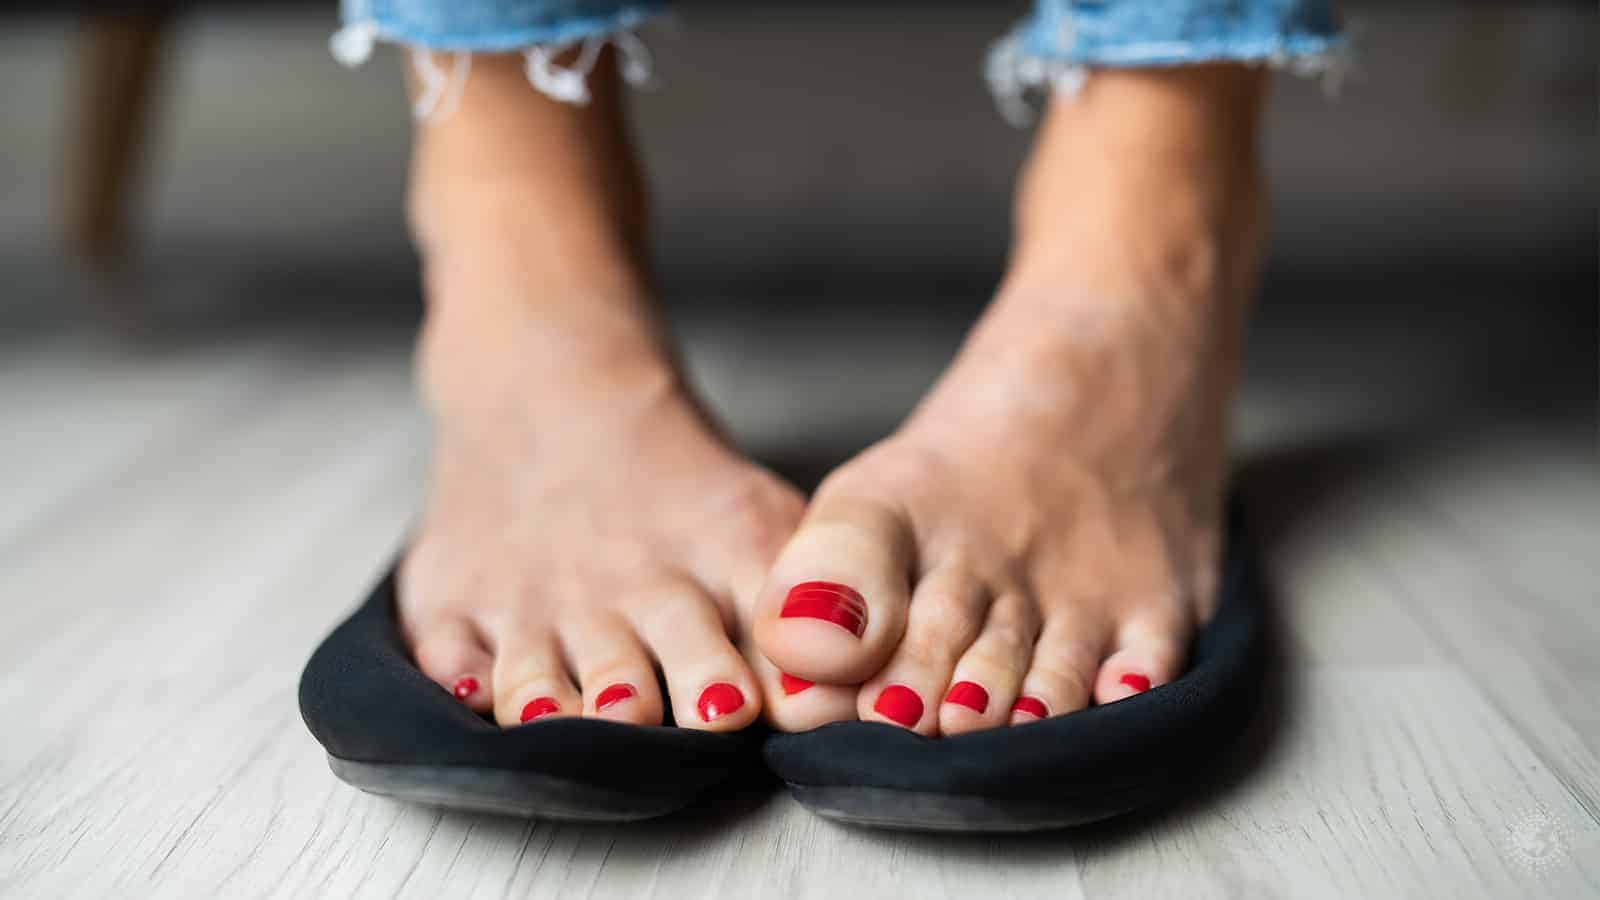 Doctors Reveal 5 Reasons For Sweaty Feet (And How to Fix It)